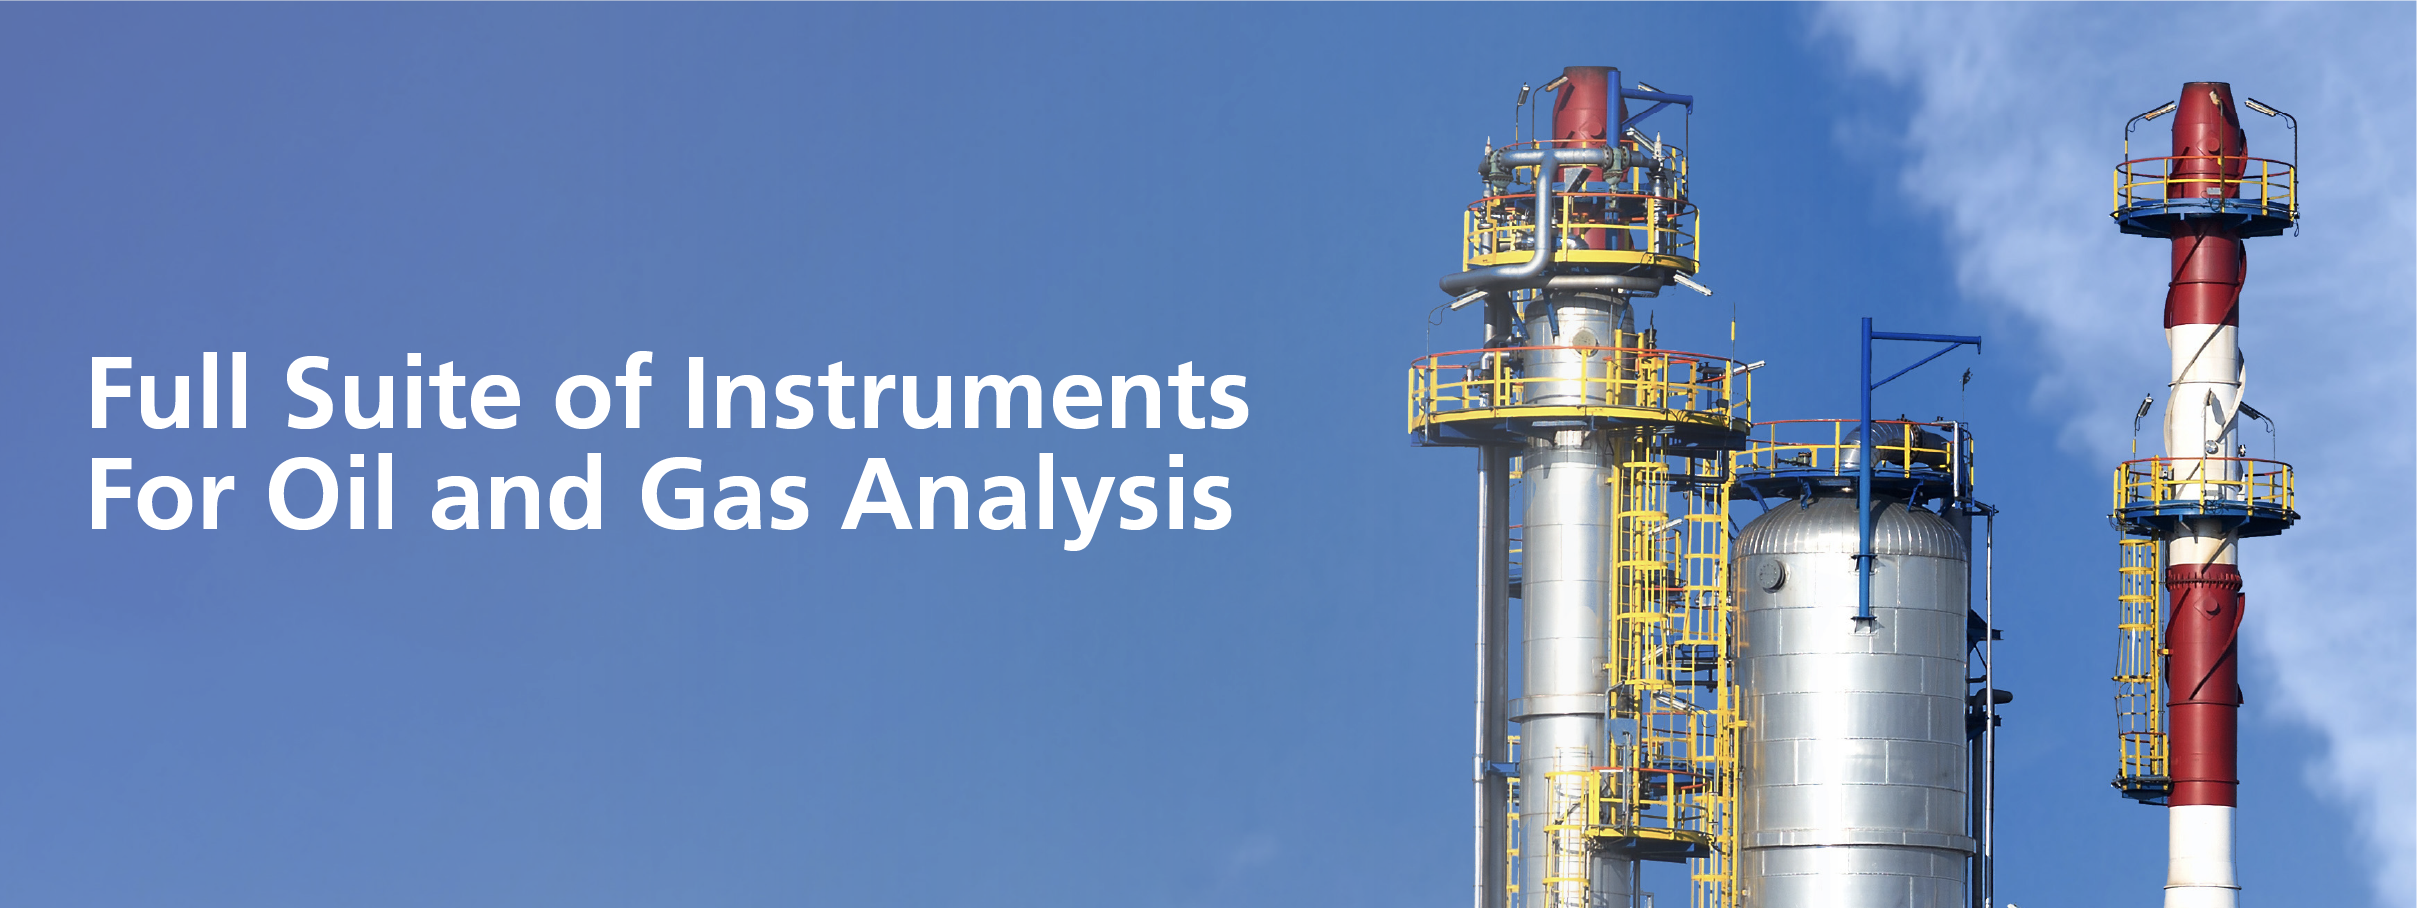 Full Suite of Instruments for Oil and Gas Analysis